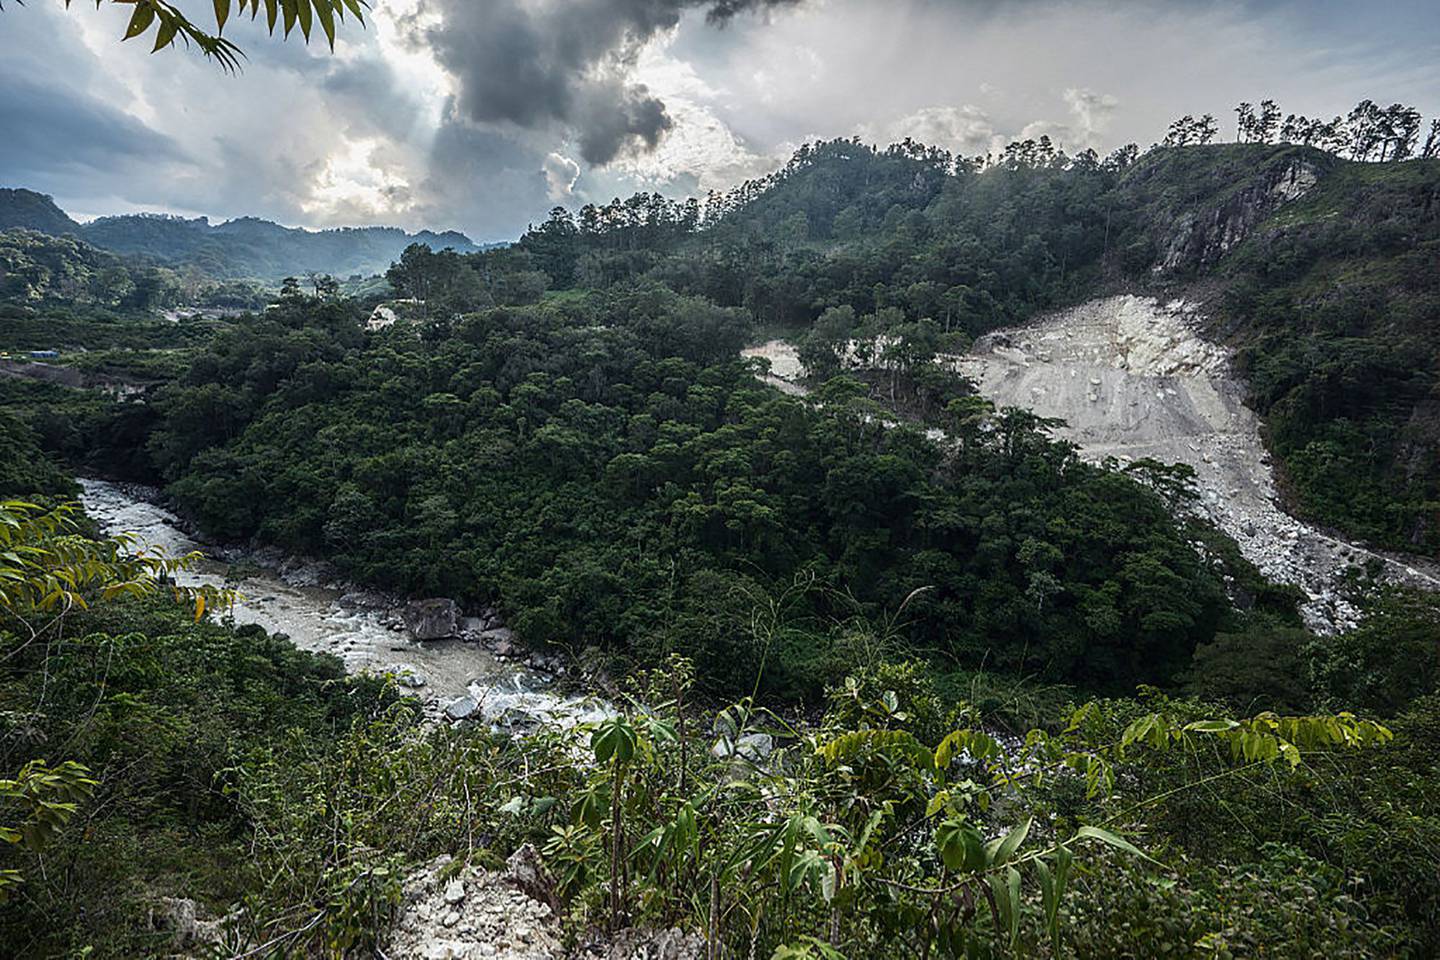 The Gualcarque River, downstream from the Aqua Zarca Dam. Sandwiched between Guatemala and Nicaragua on the Caribbean coast, Honduras is blanketed in forest and rich in valuable minerals.